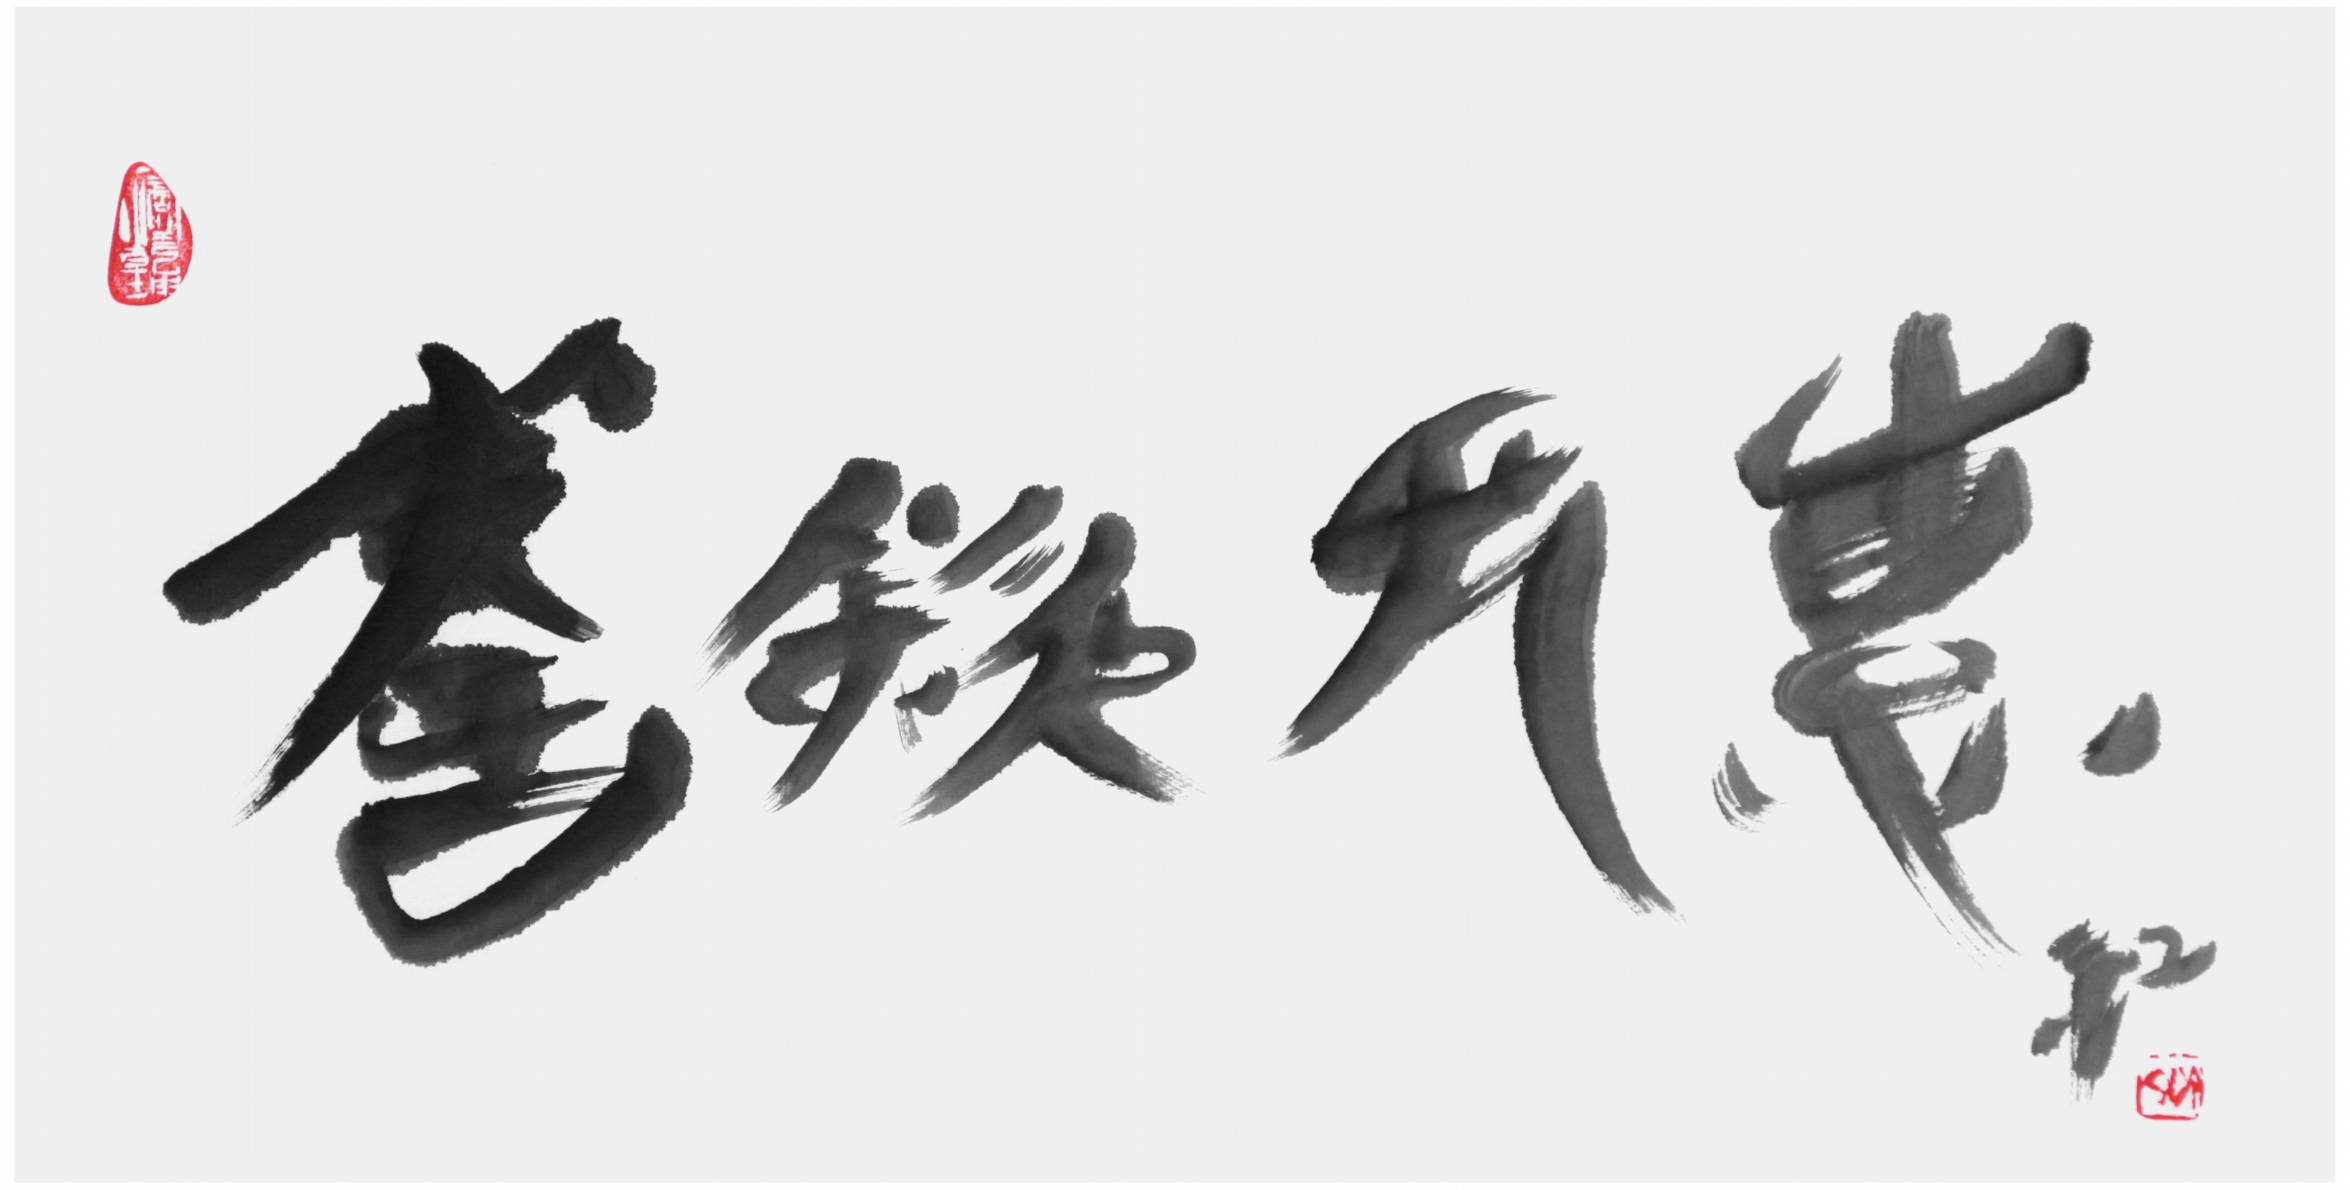 Qi Hong (Sai Koh) 's freehand brushwork style semi-seal script Chinese calligraphy, One may be an Intelligent Person by Tea, 69×34cm, Ink - Qi Hong (Sai Koh) Calligraphy Web